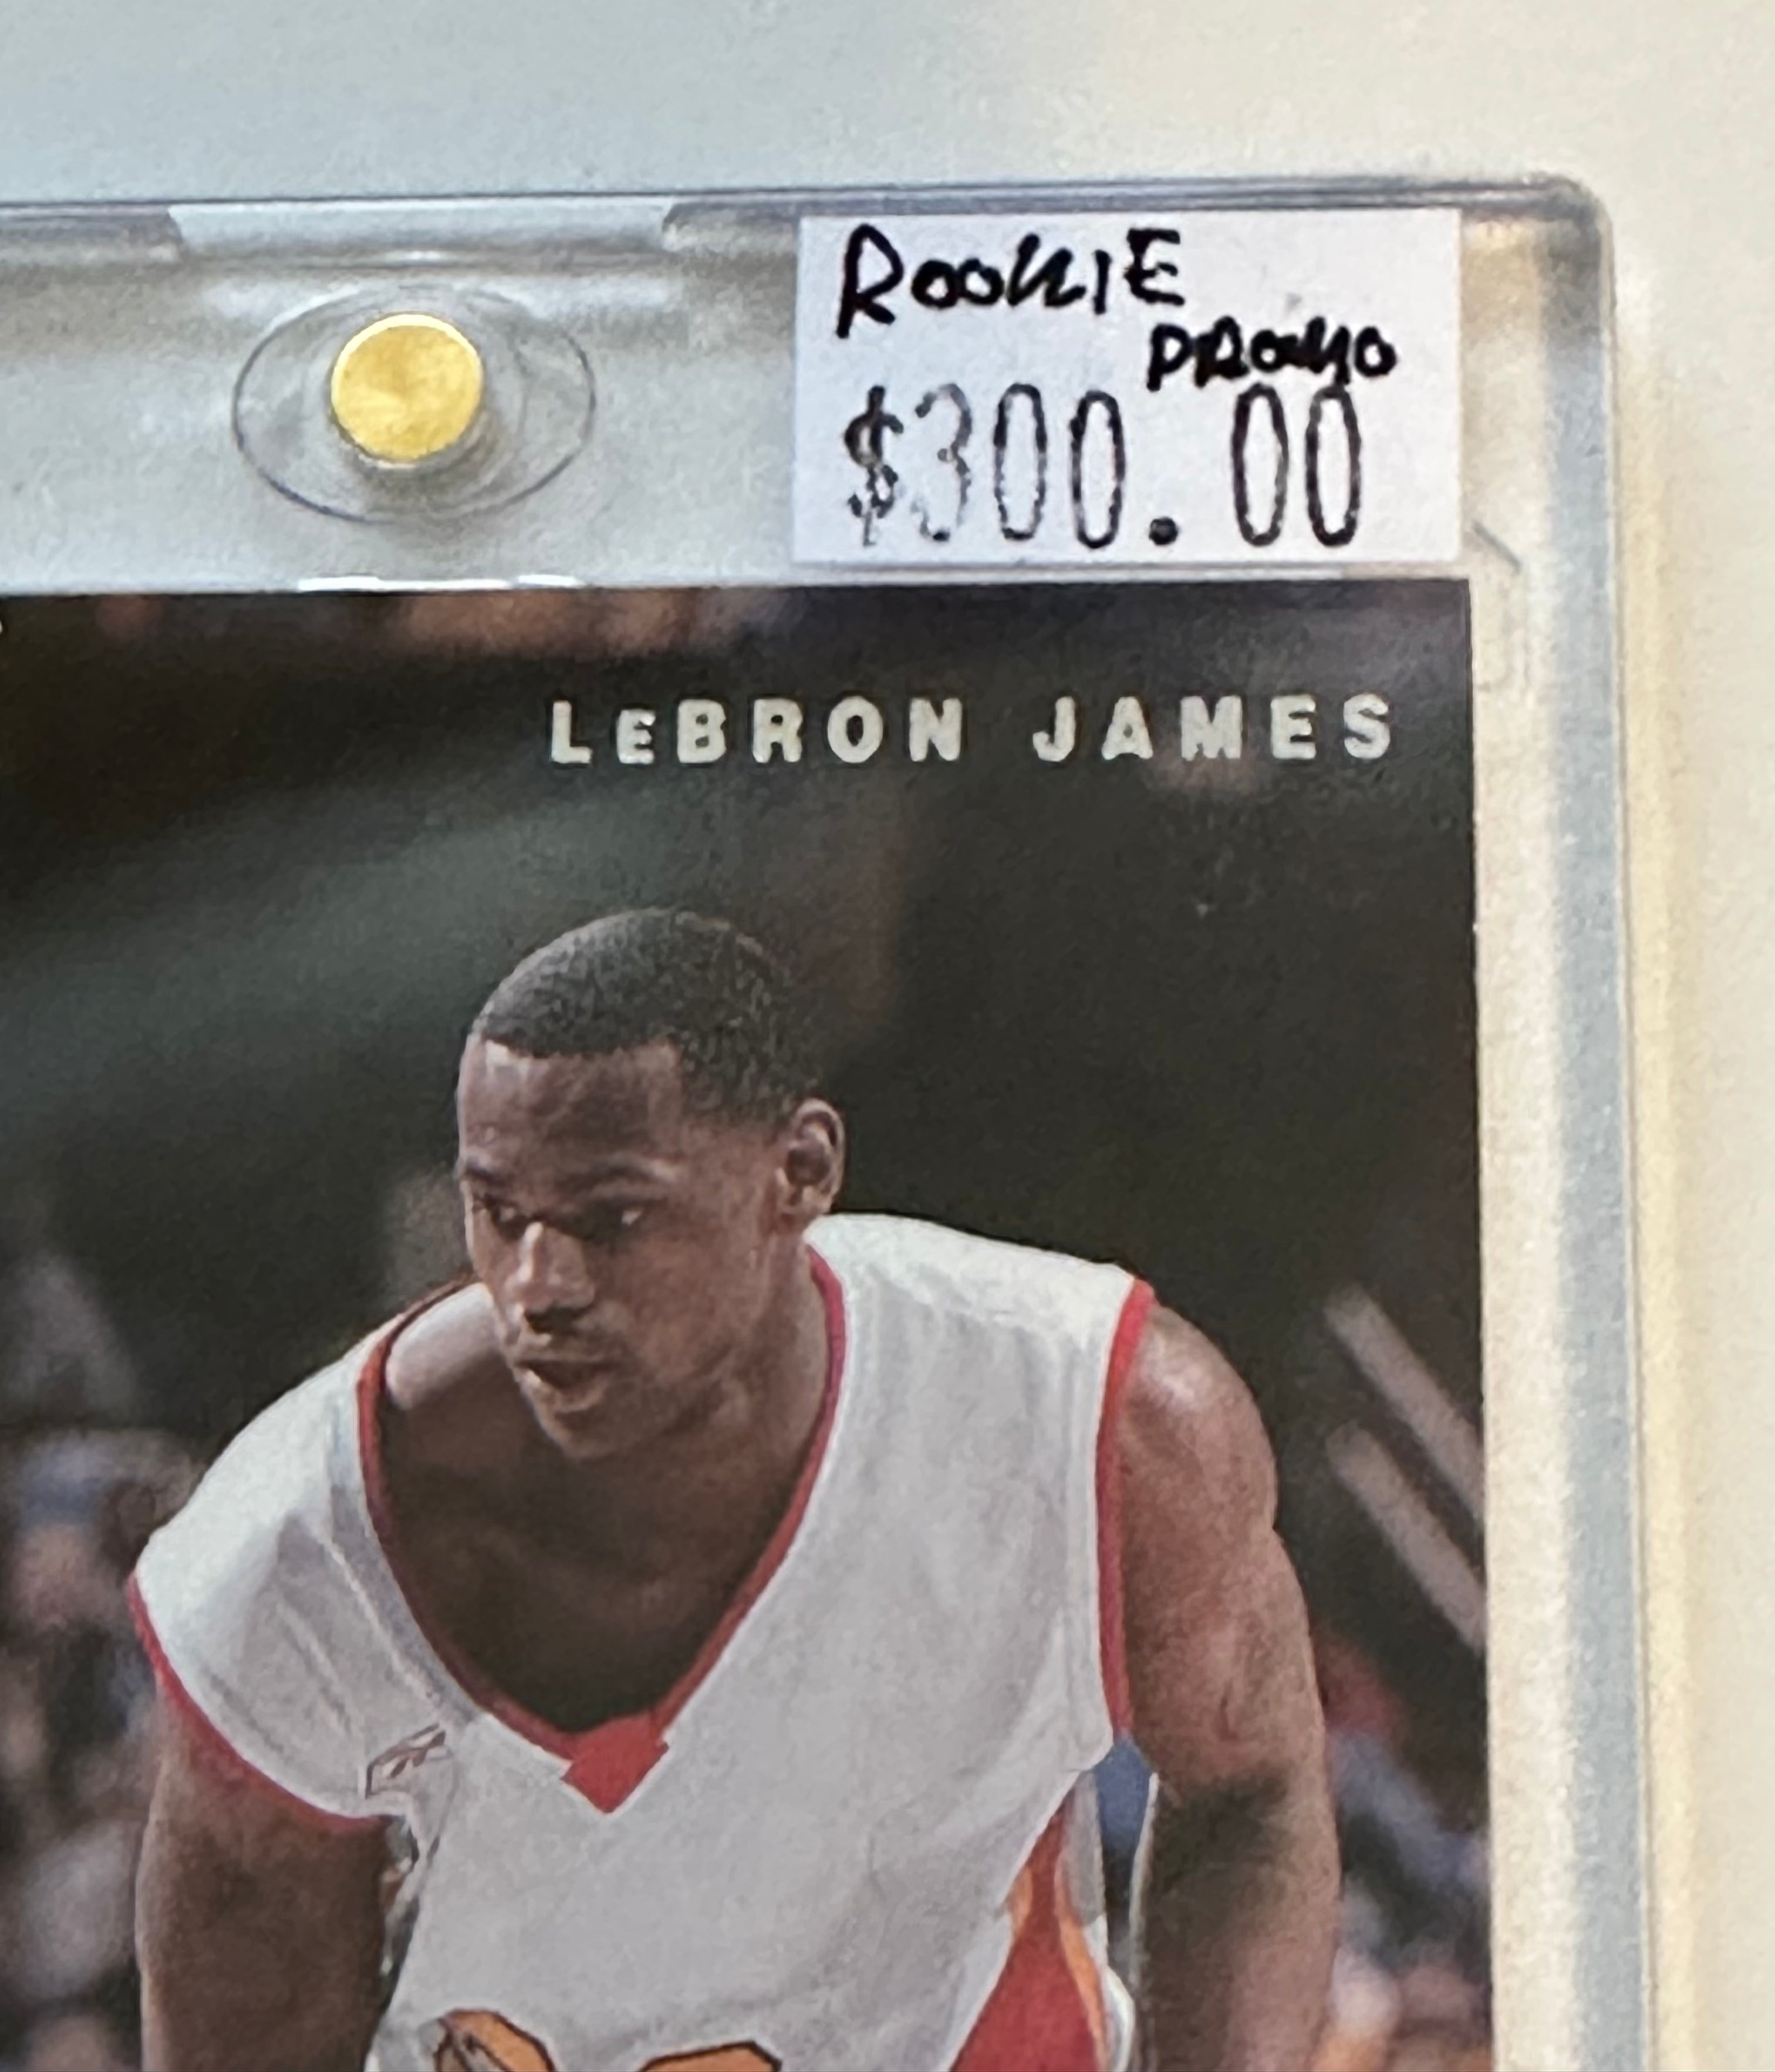 LeBron James UD Top Prospects Rookie NBA Promo Card 2003